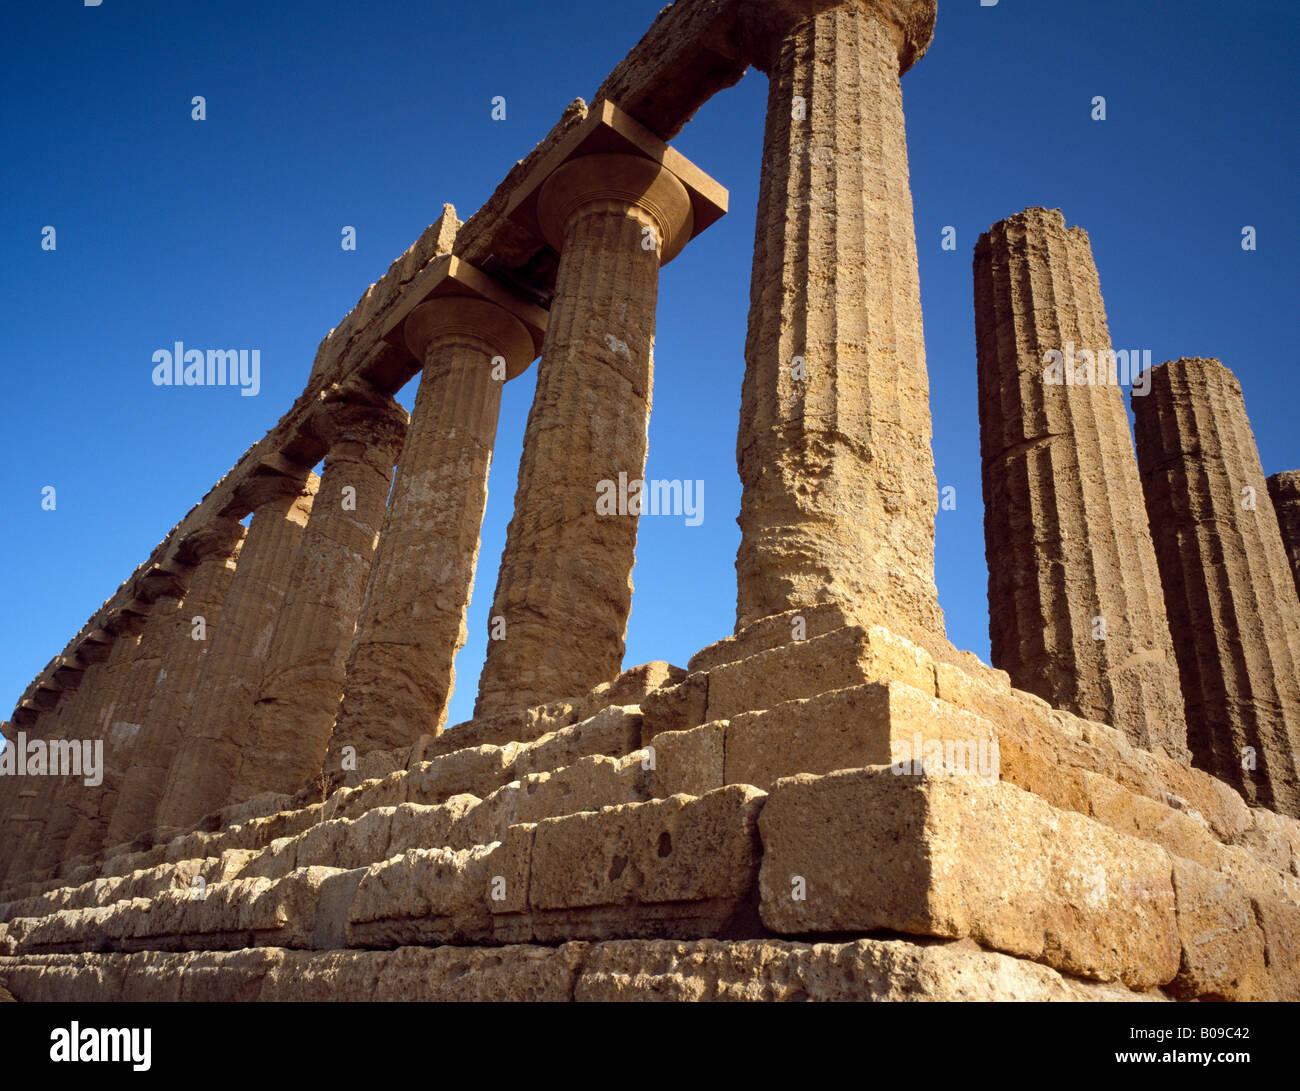 Temple of Giunone, Valley of the Temples Agrigento Sicily Italy EU. Stock Photo